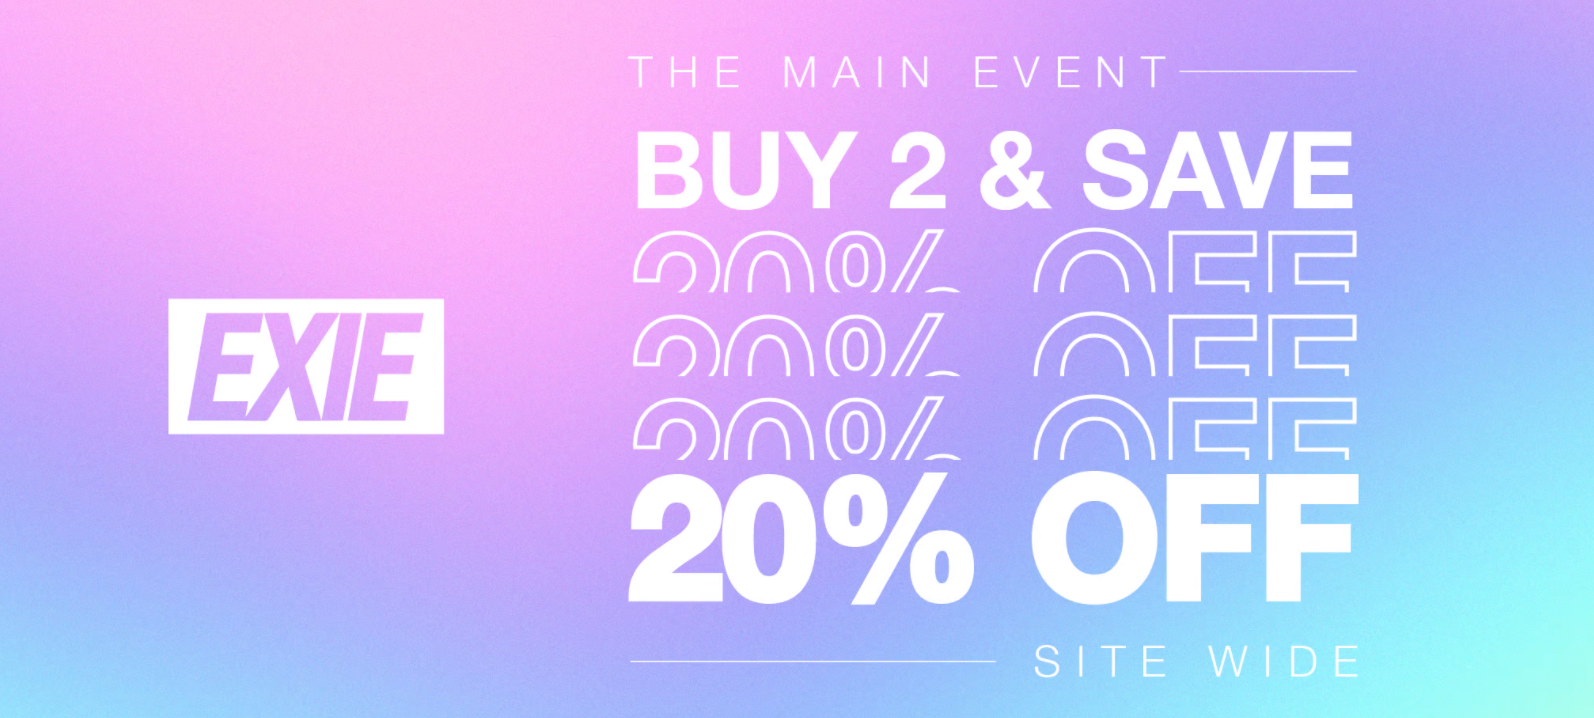 Exie The Main Event 20% OFF when you buy 2 sitewide